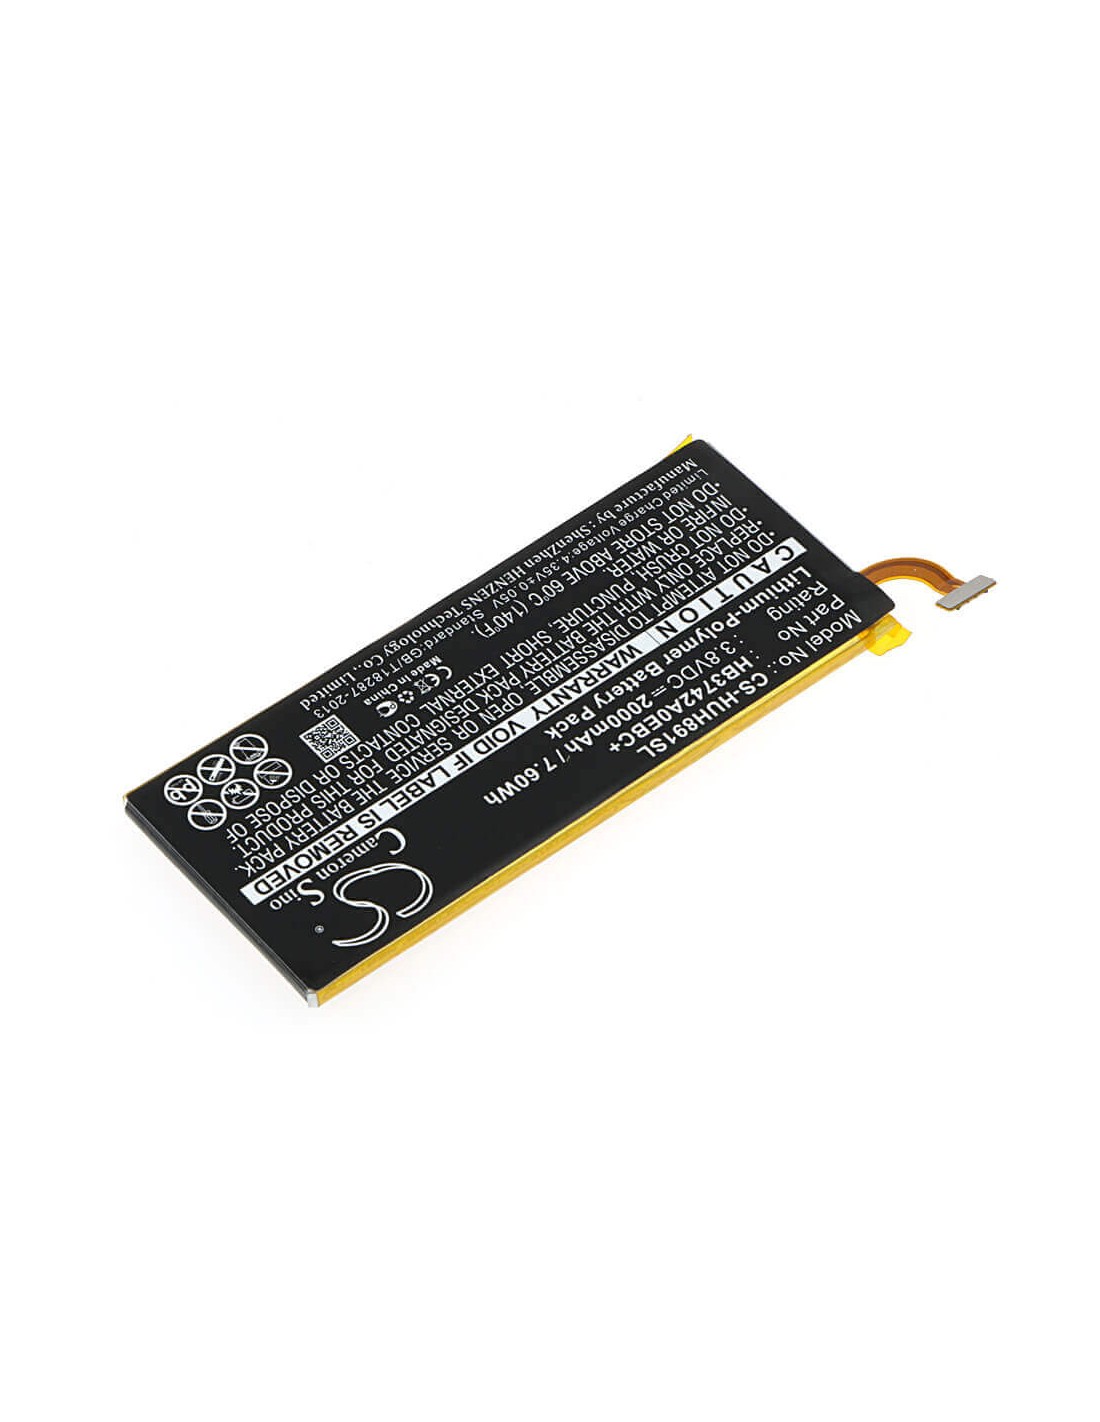 Battery for Huawei H891L, Pronto, Ascend SnapTo 3.8V, 2000mAh - 7.60Wh